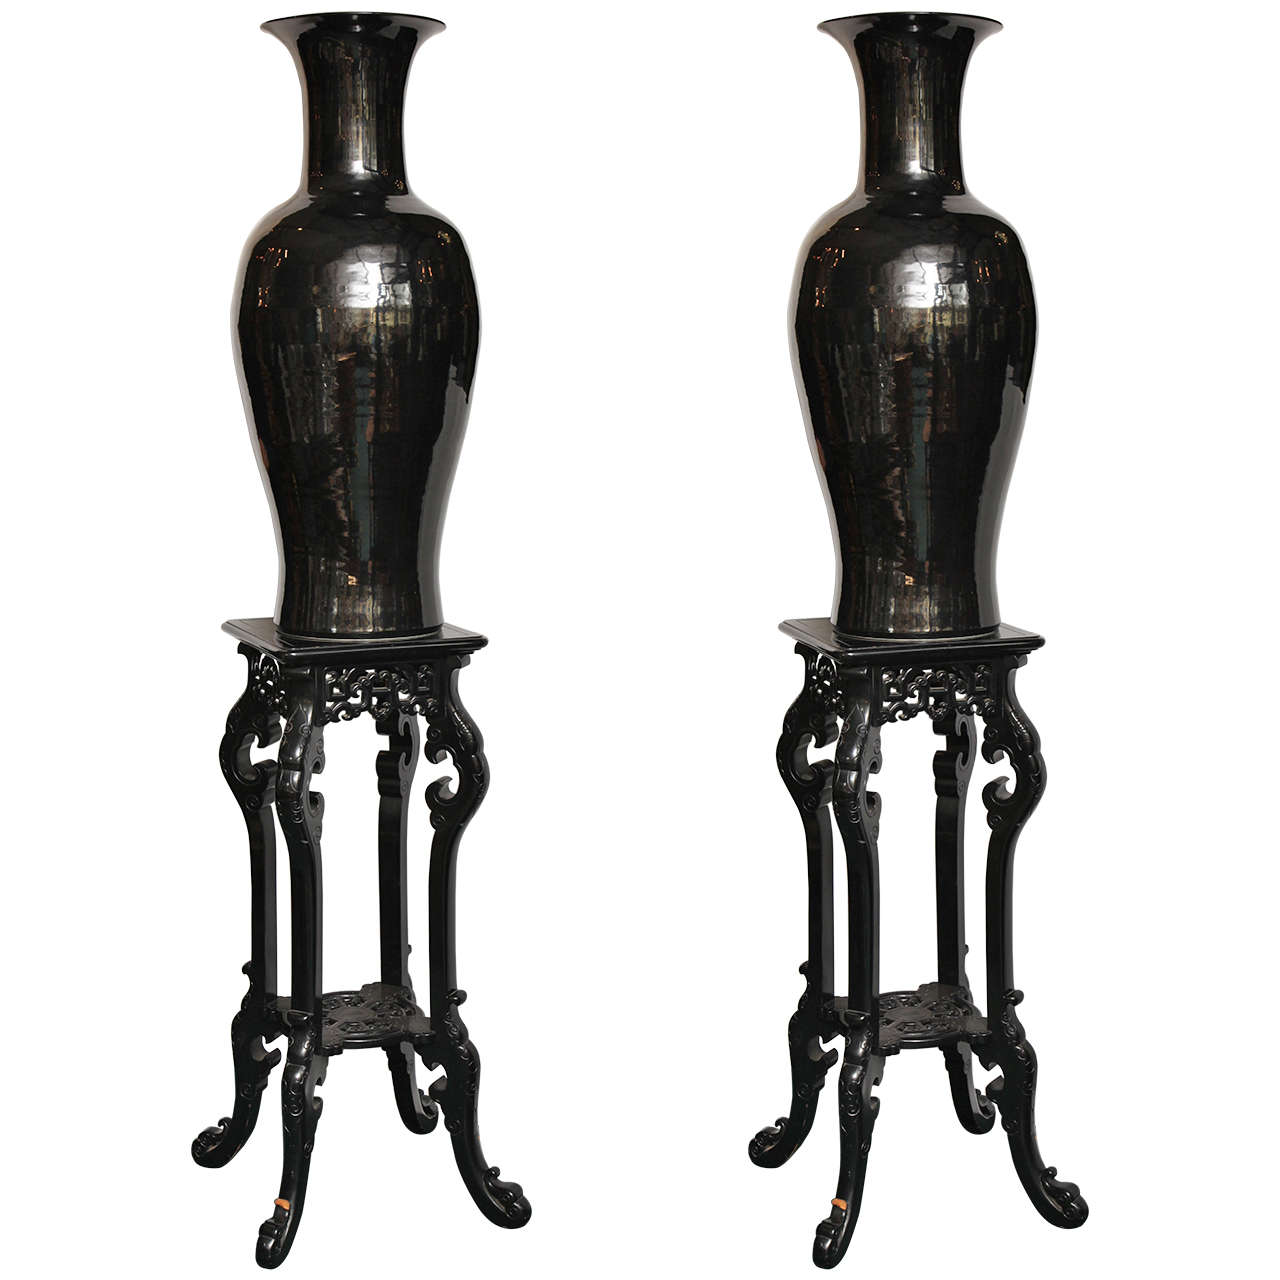 Pair of Decorative Black Chinese Style Porcelain Vases on Lacquered Pedestals